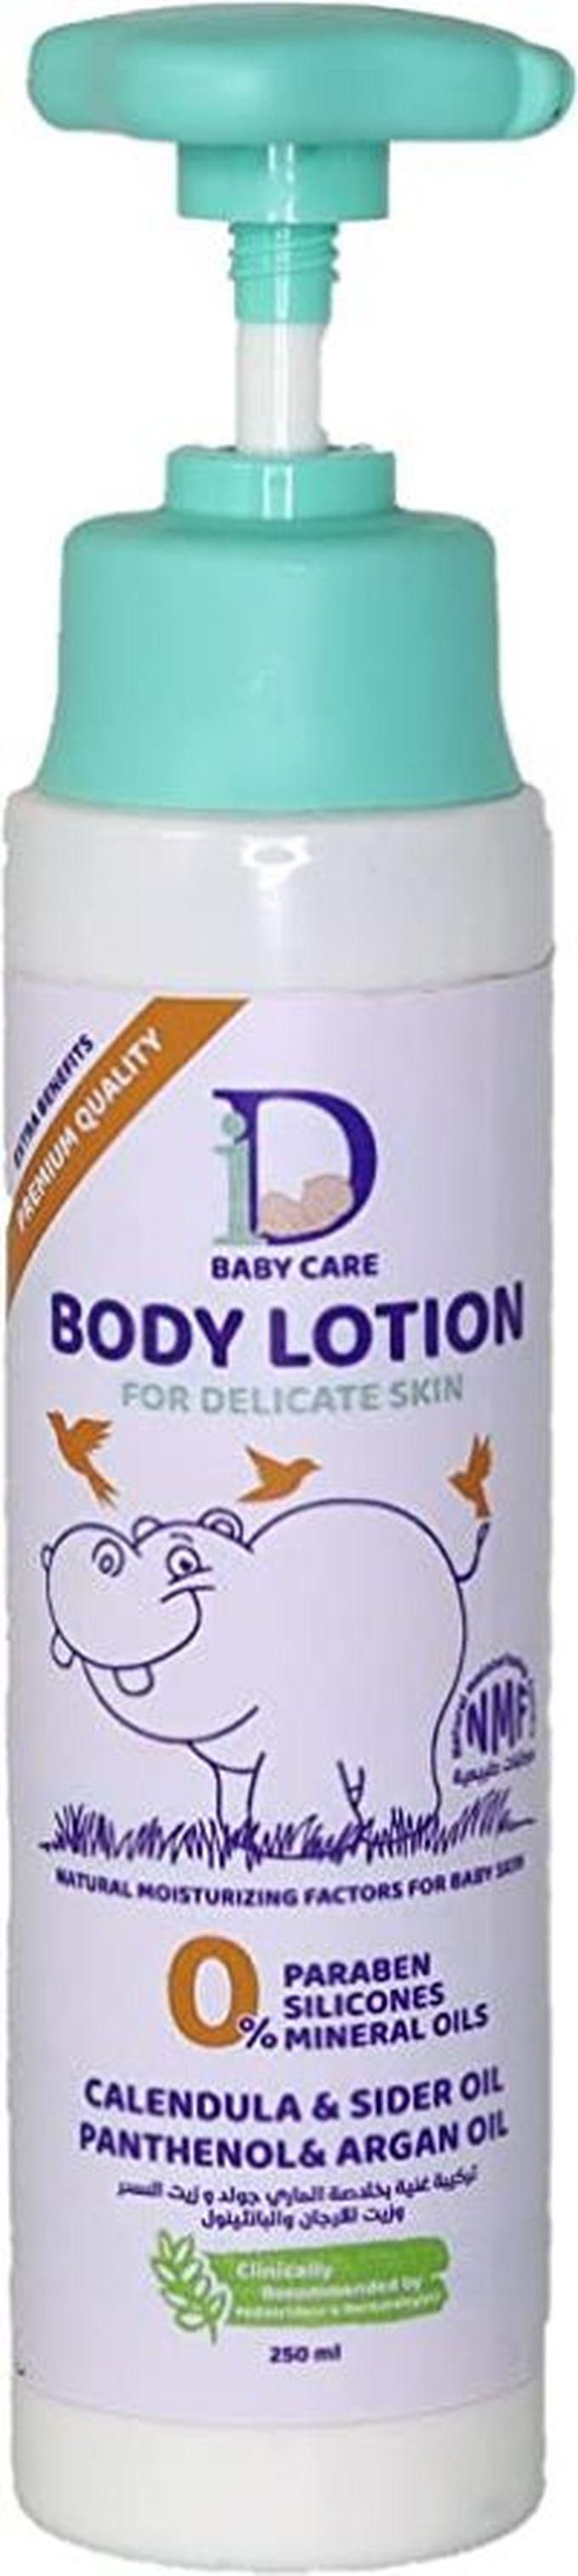 Id Baby Care Body Lotion 250 Ml